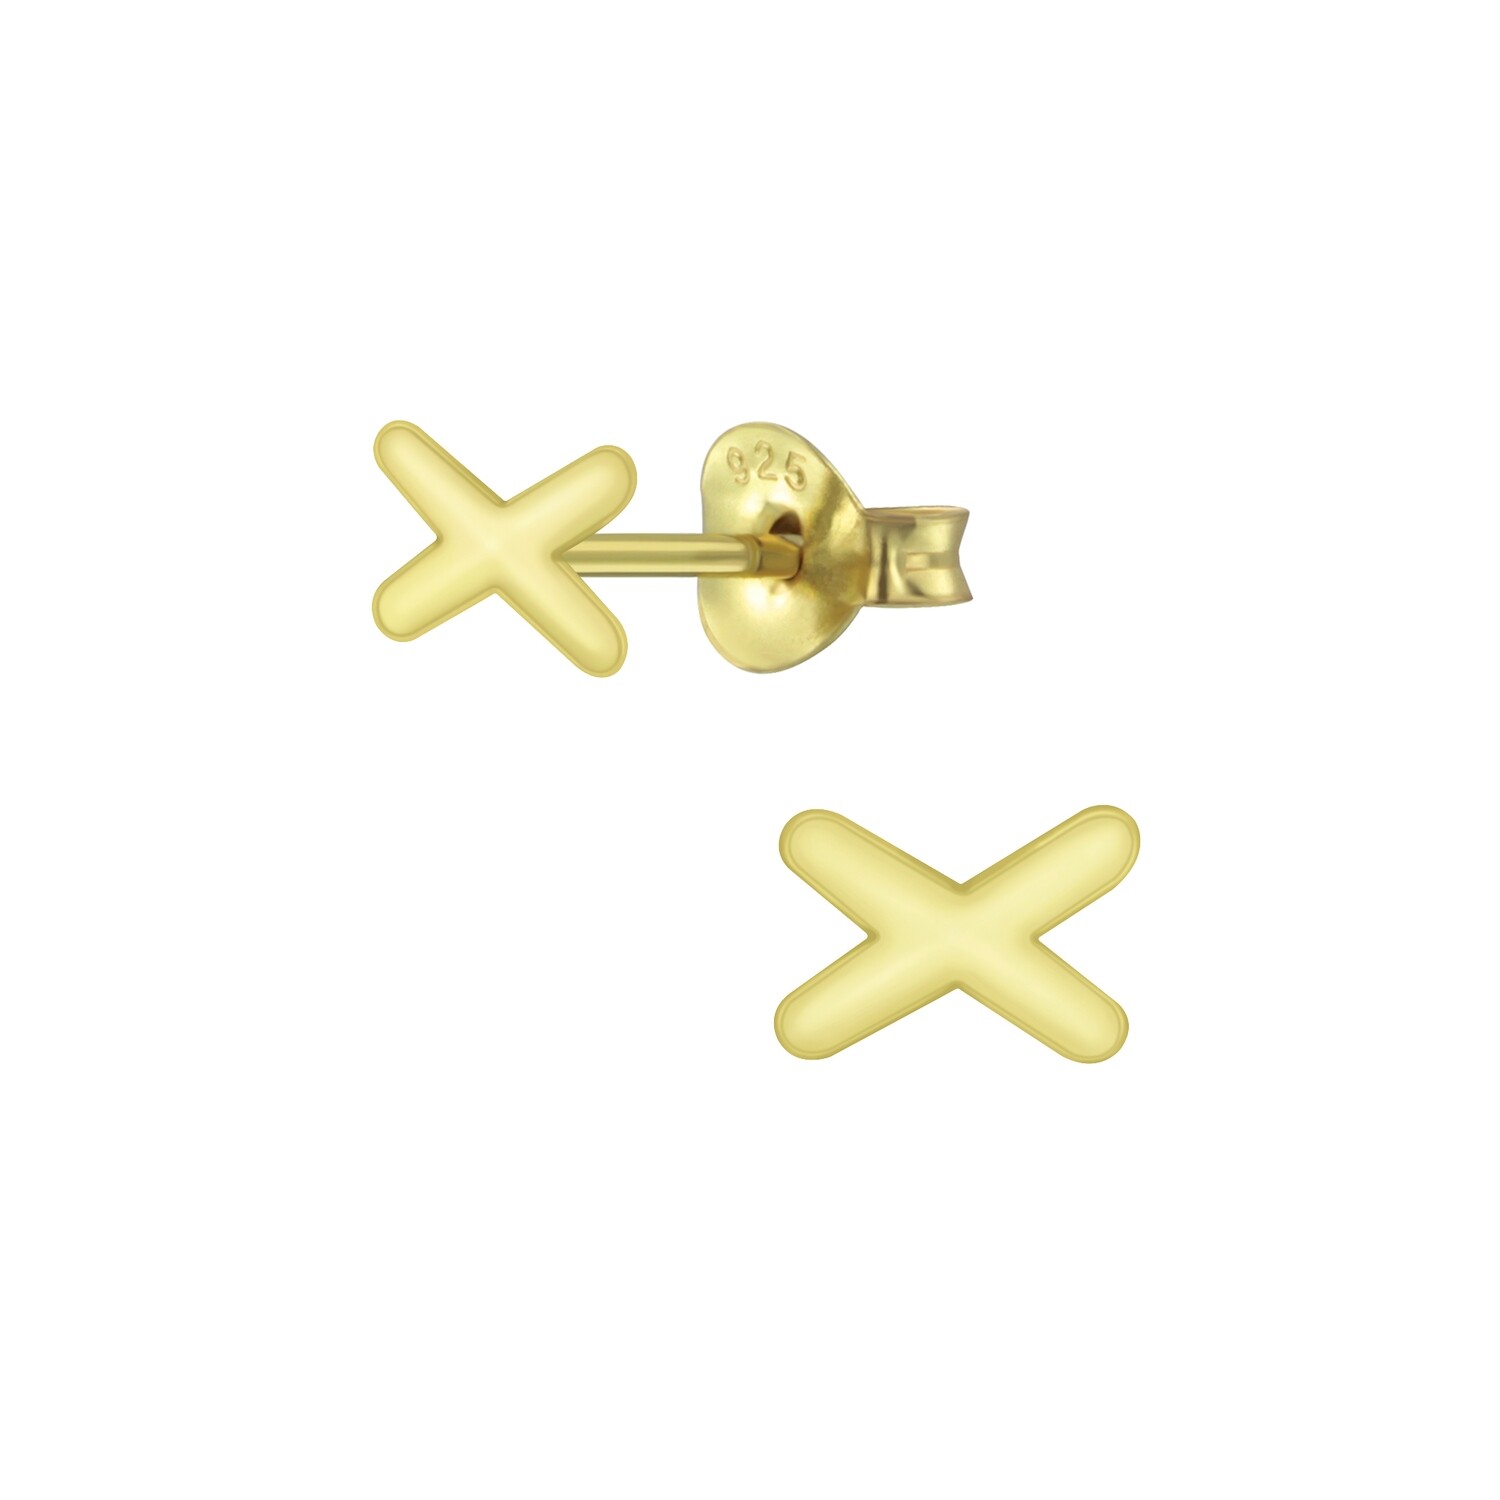 X Shaped Posts - Gold Plated Sterling Silver - P60-7